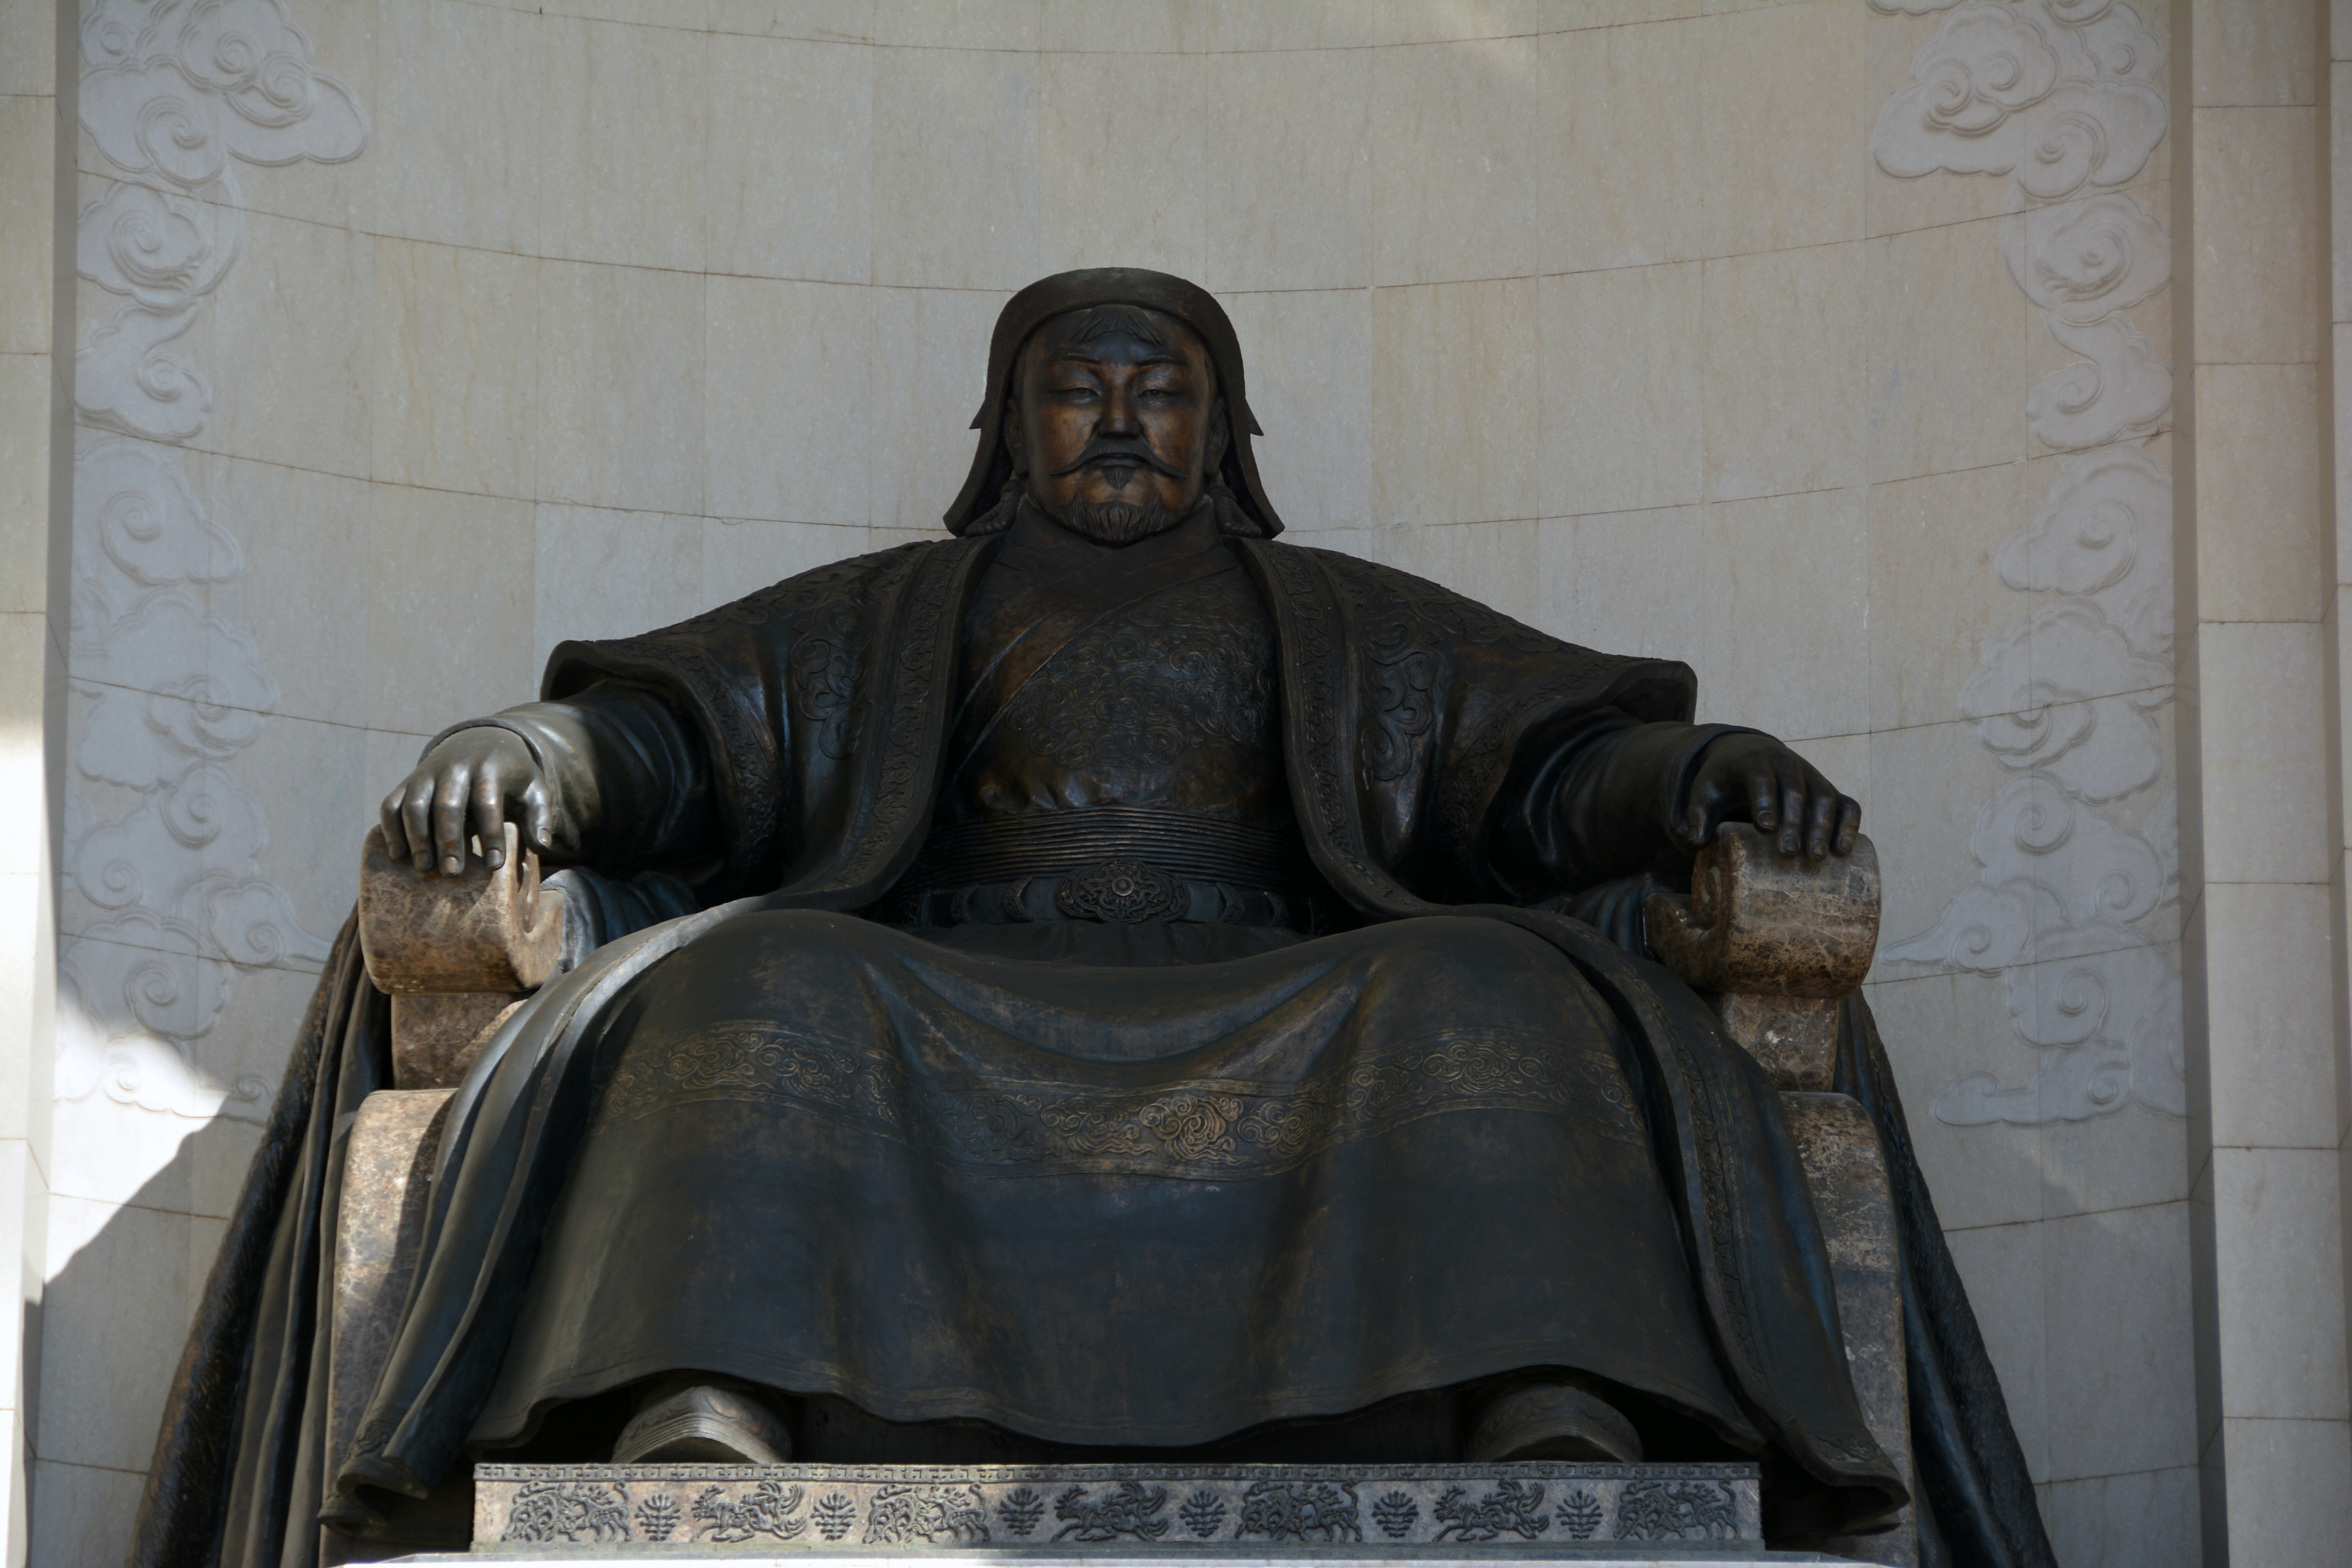 An image depicting Genghis Khan, the legendary leader who played a vital role in uniting the Mongolian tribes.